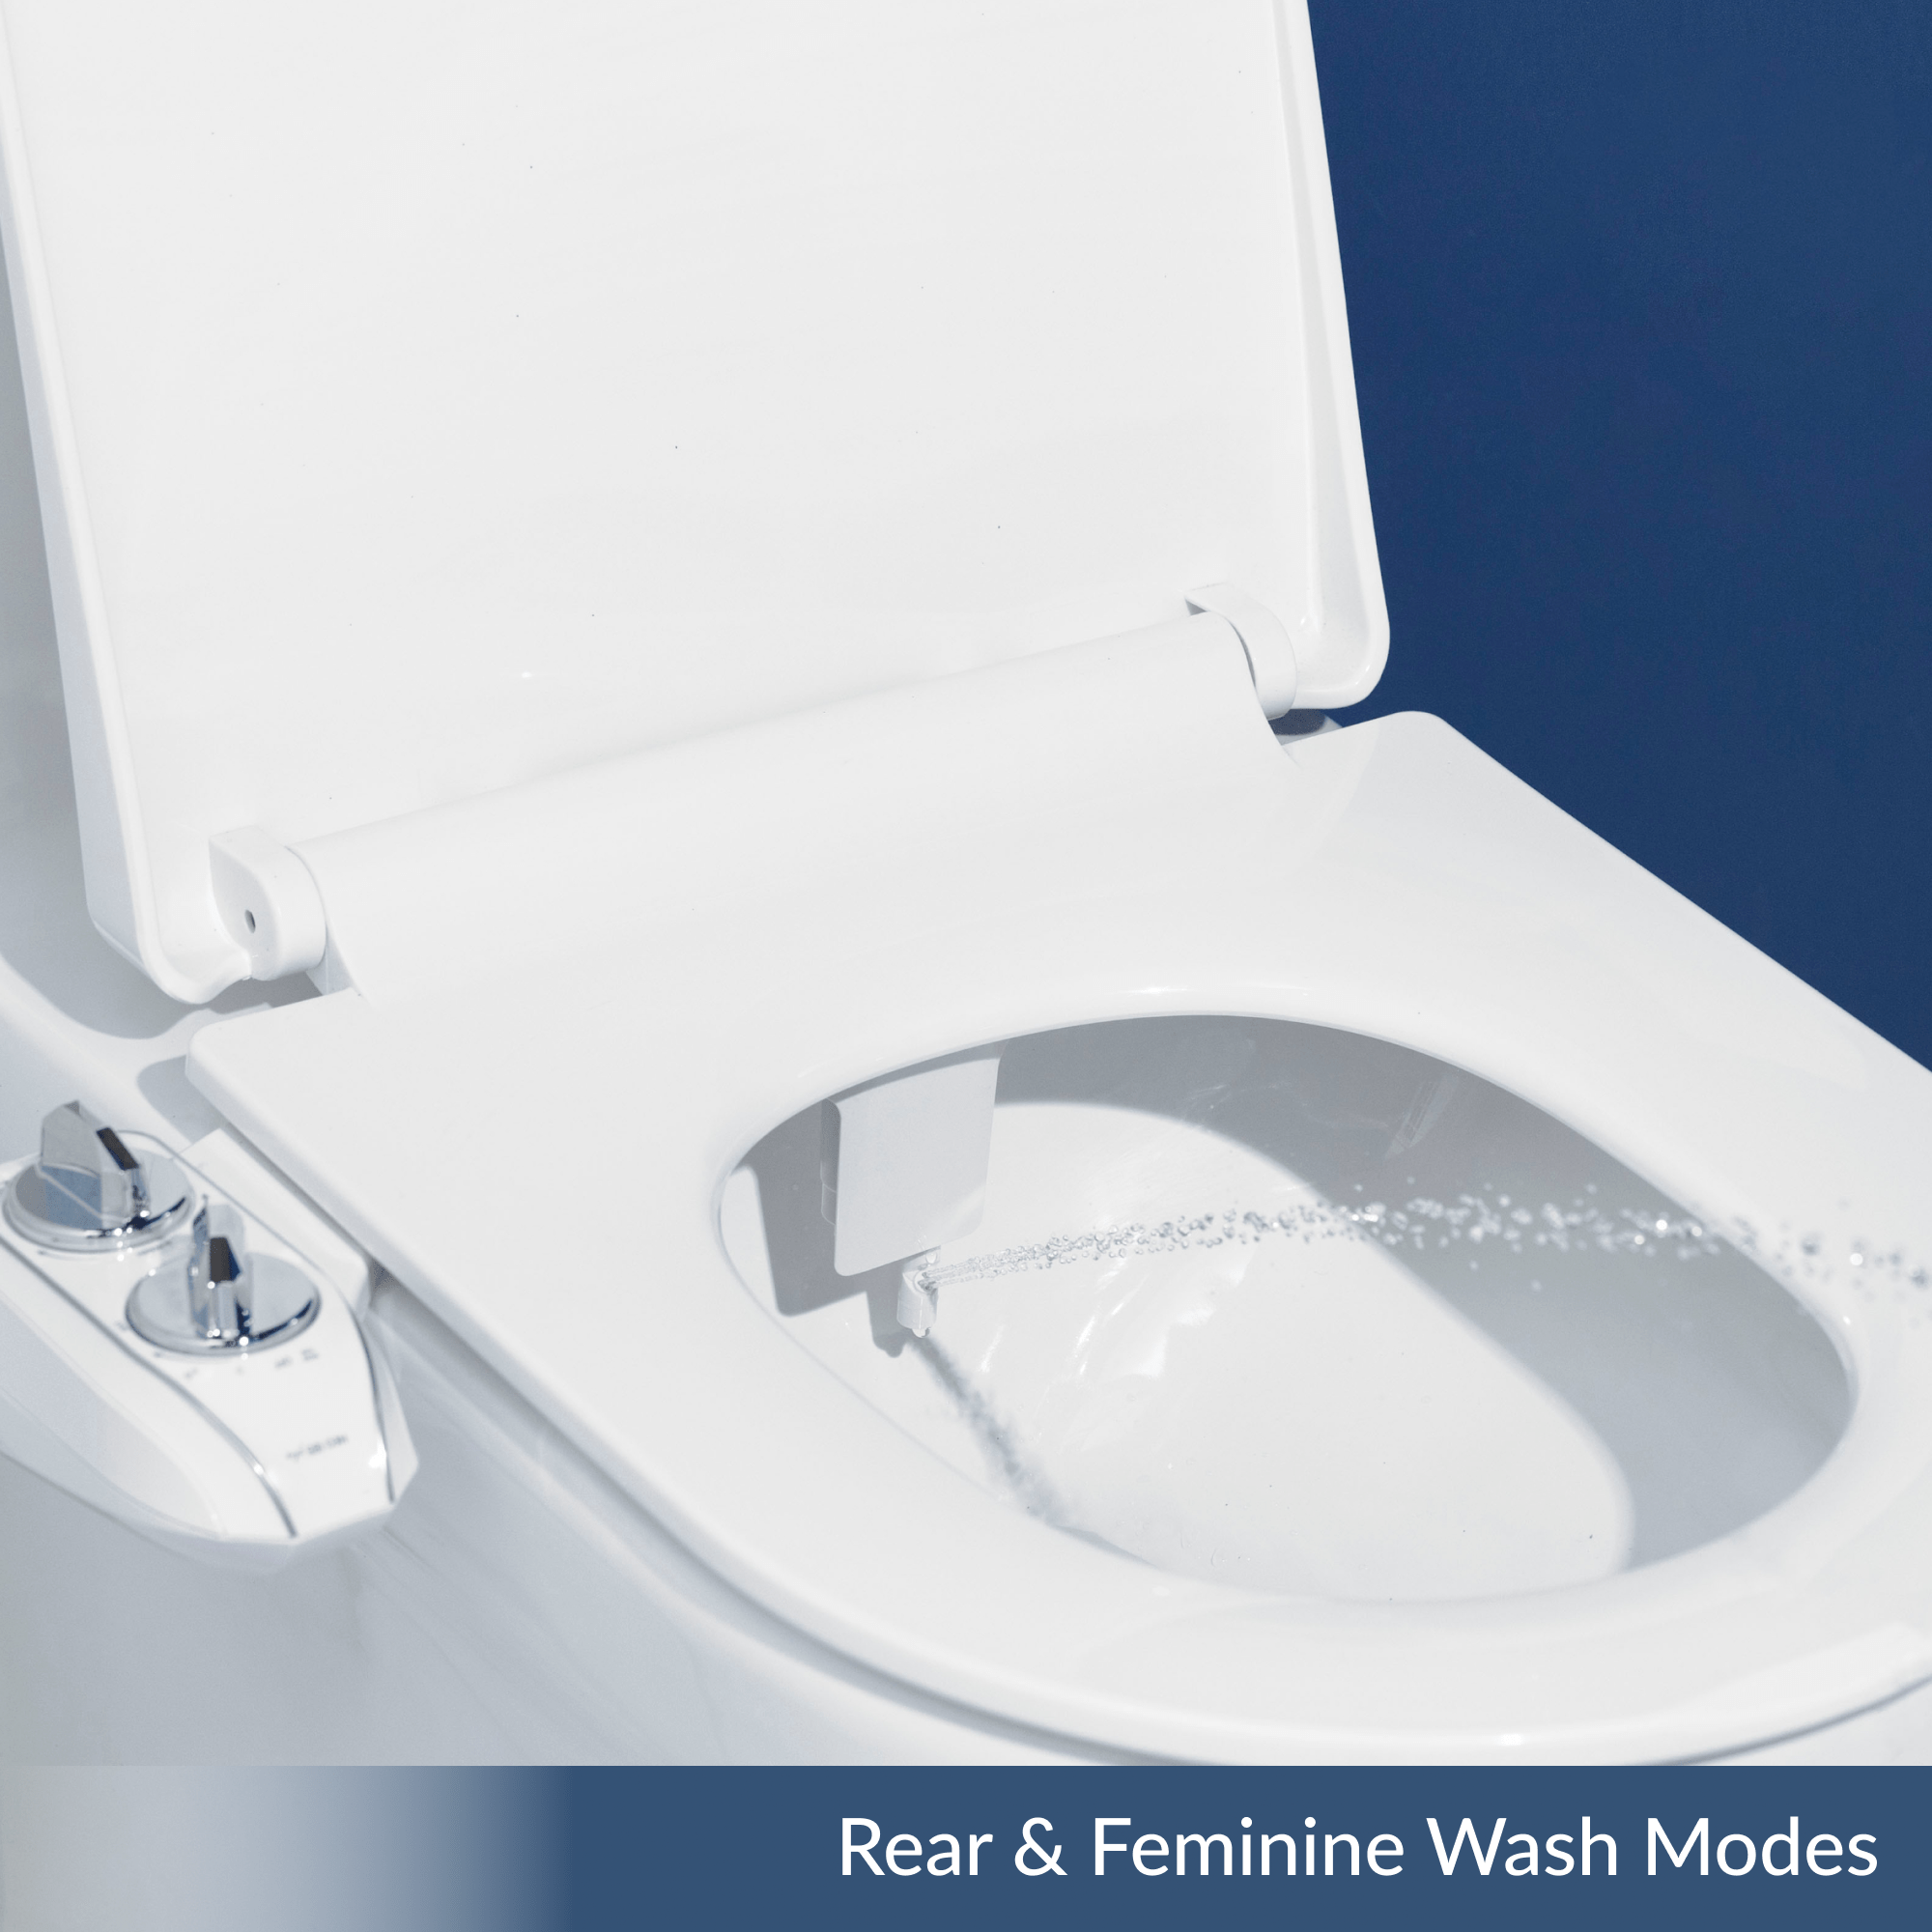 185 LUXE Bidet models include a Rear and Feminine Wash Mode